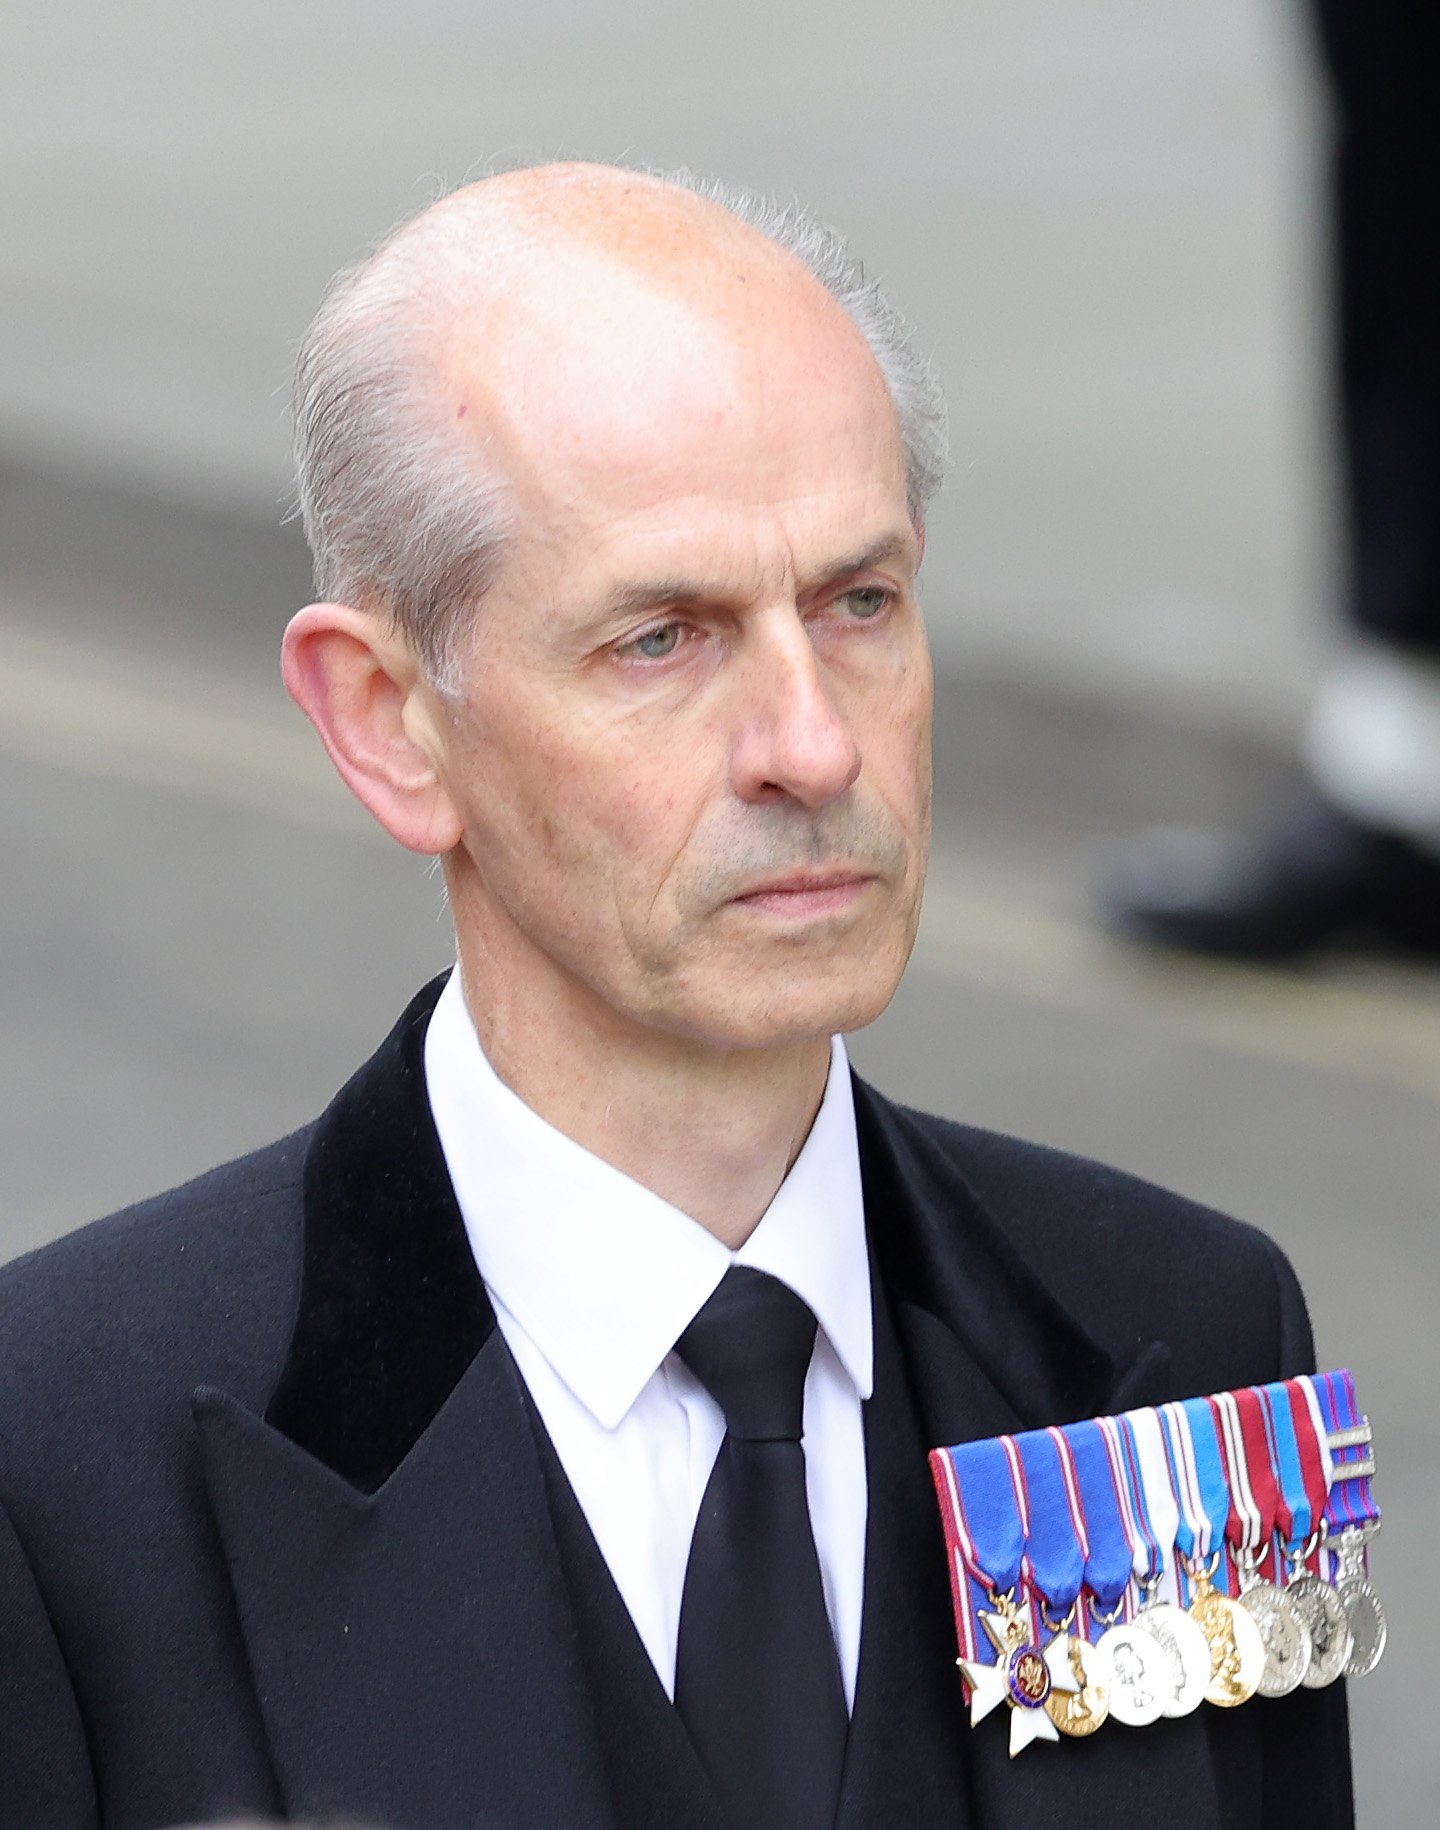 Paul Whybrew attending the State Funeral of Queen Elizabeth II at Westminster Abbey